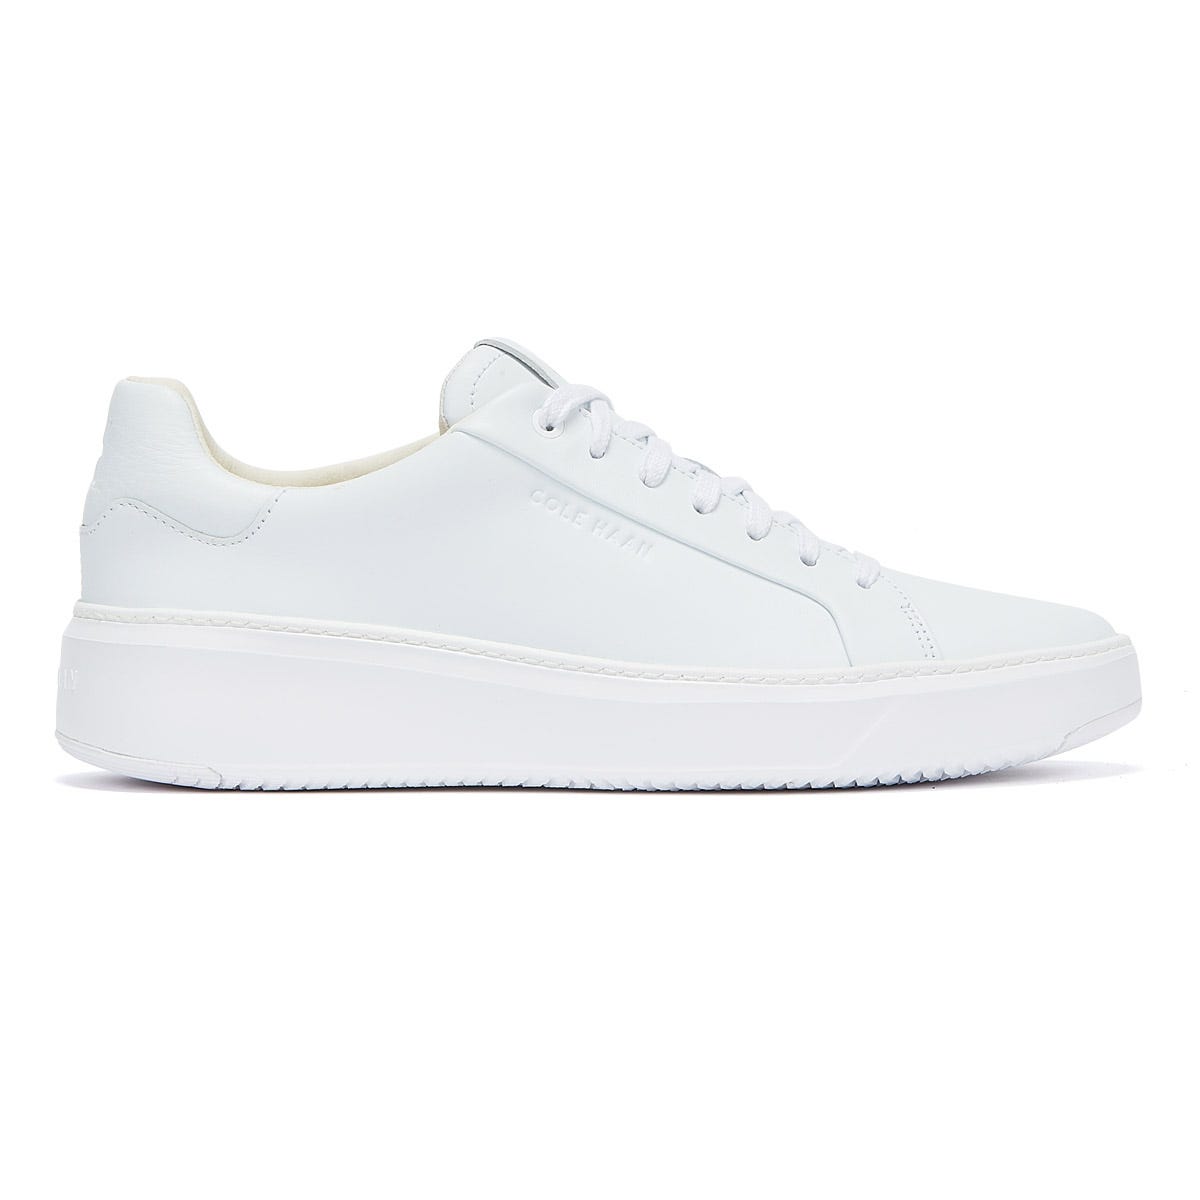 Cole Haan Grandpro Topspin Mens Optic White / Optic White Trainers